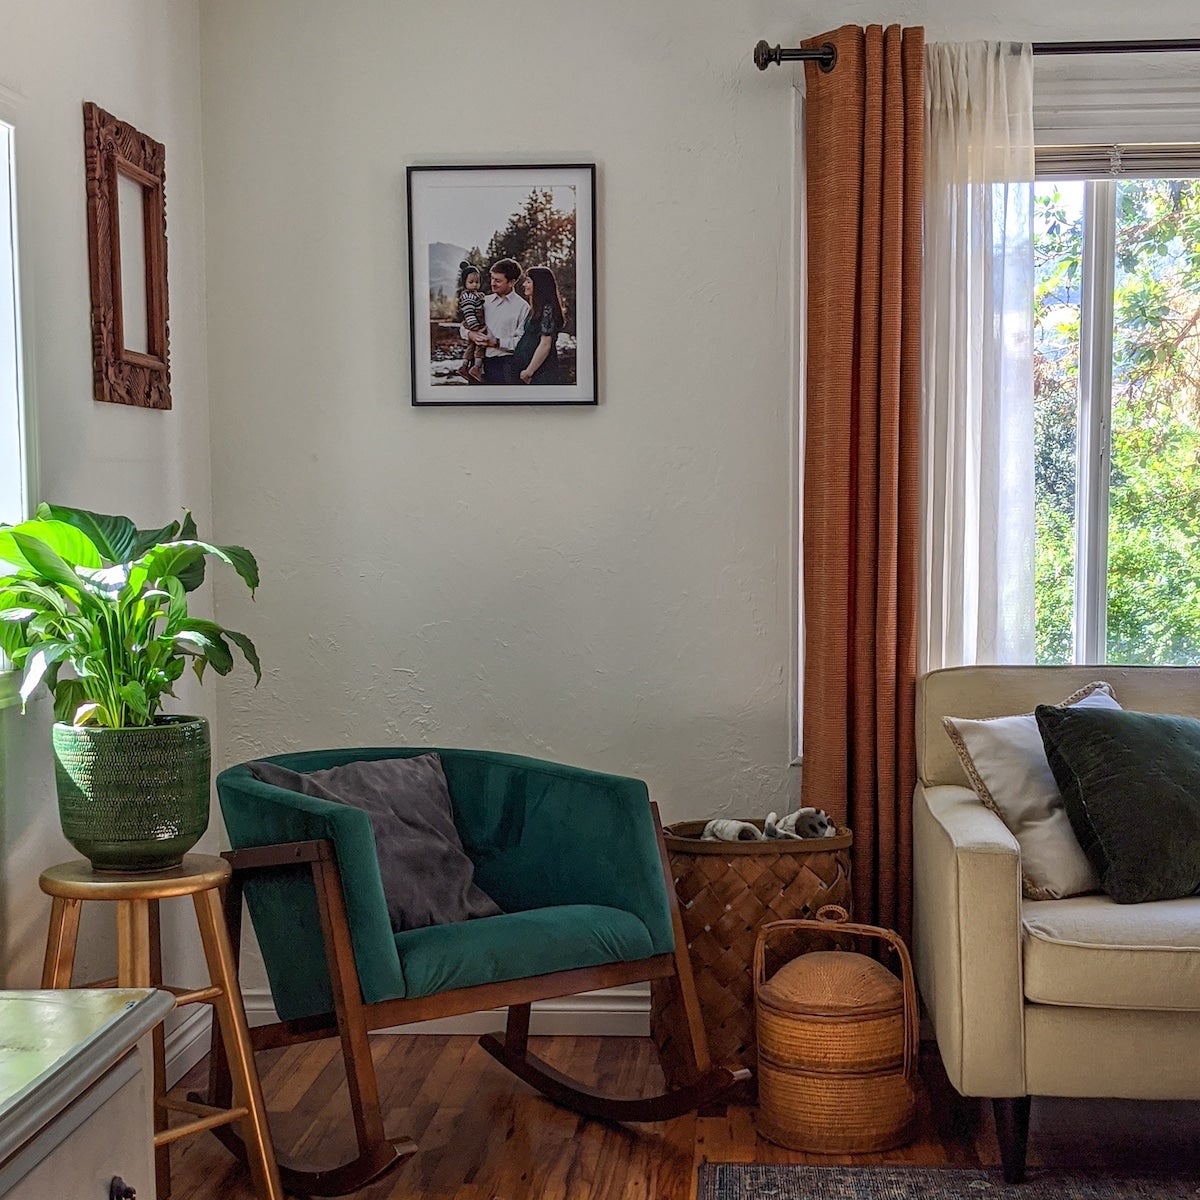 Corner of a living room with an accent chair, plant, and a photo frame on the wall.